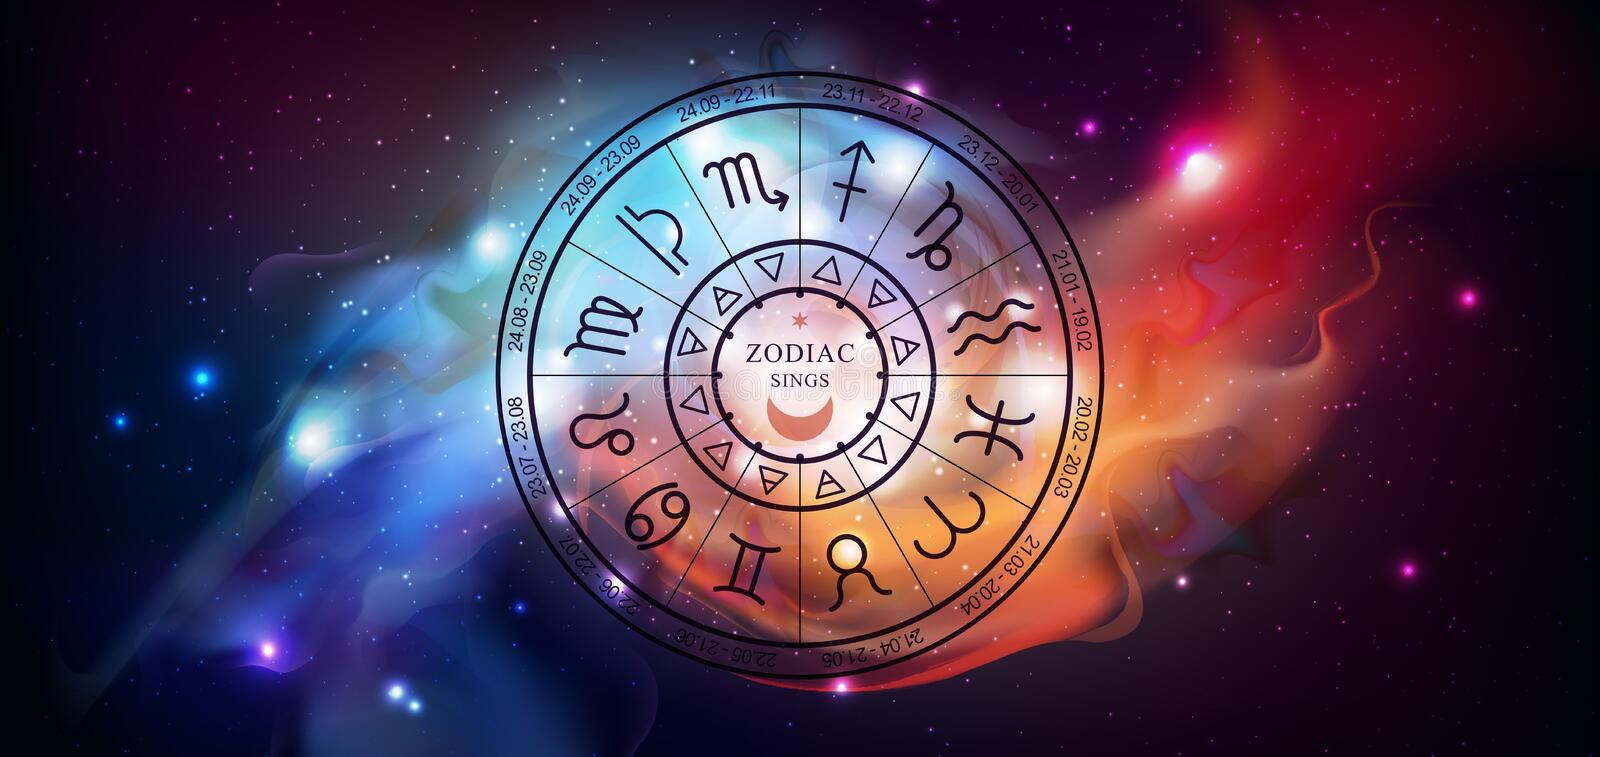 April Babies – The 12 Signs of the Zodiac and Which One is Symbolized by the Creature With the Mouth